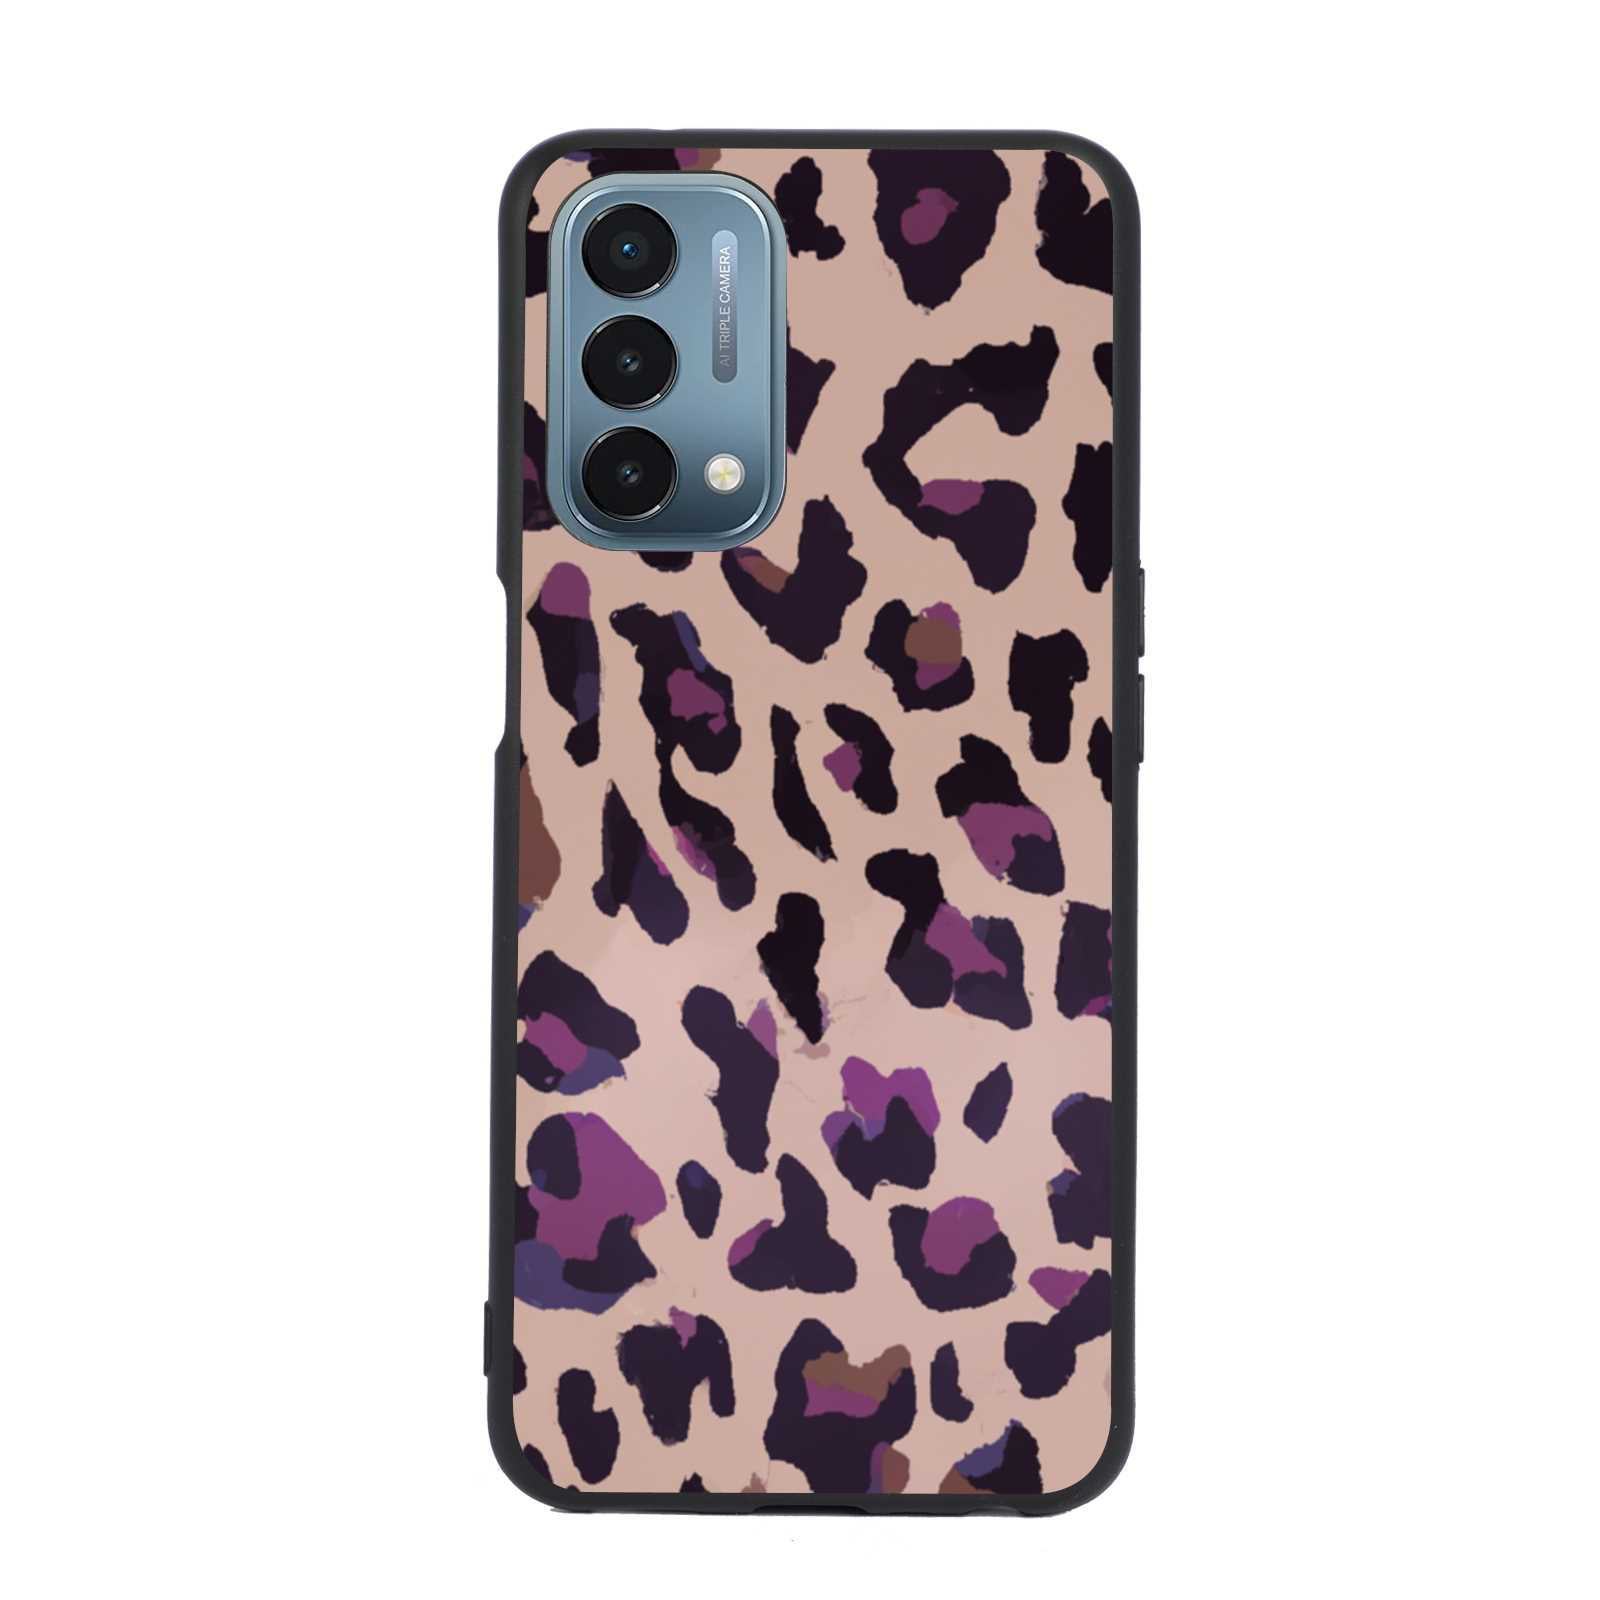 Leopard Print Cheetah Pink phone case for OnePlus Nord N200 for Women Men silicone Style Shockproof - Leopard Print Pink Case for OnePlus Nord N200 - Walmart.com